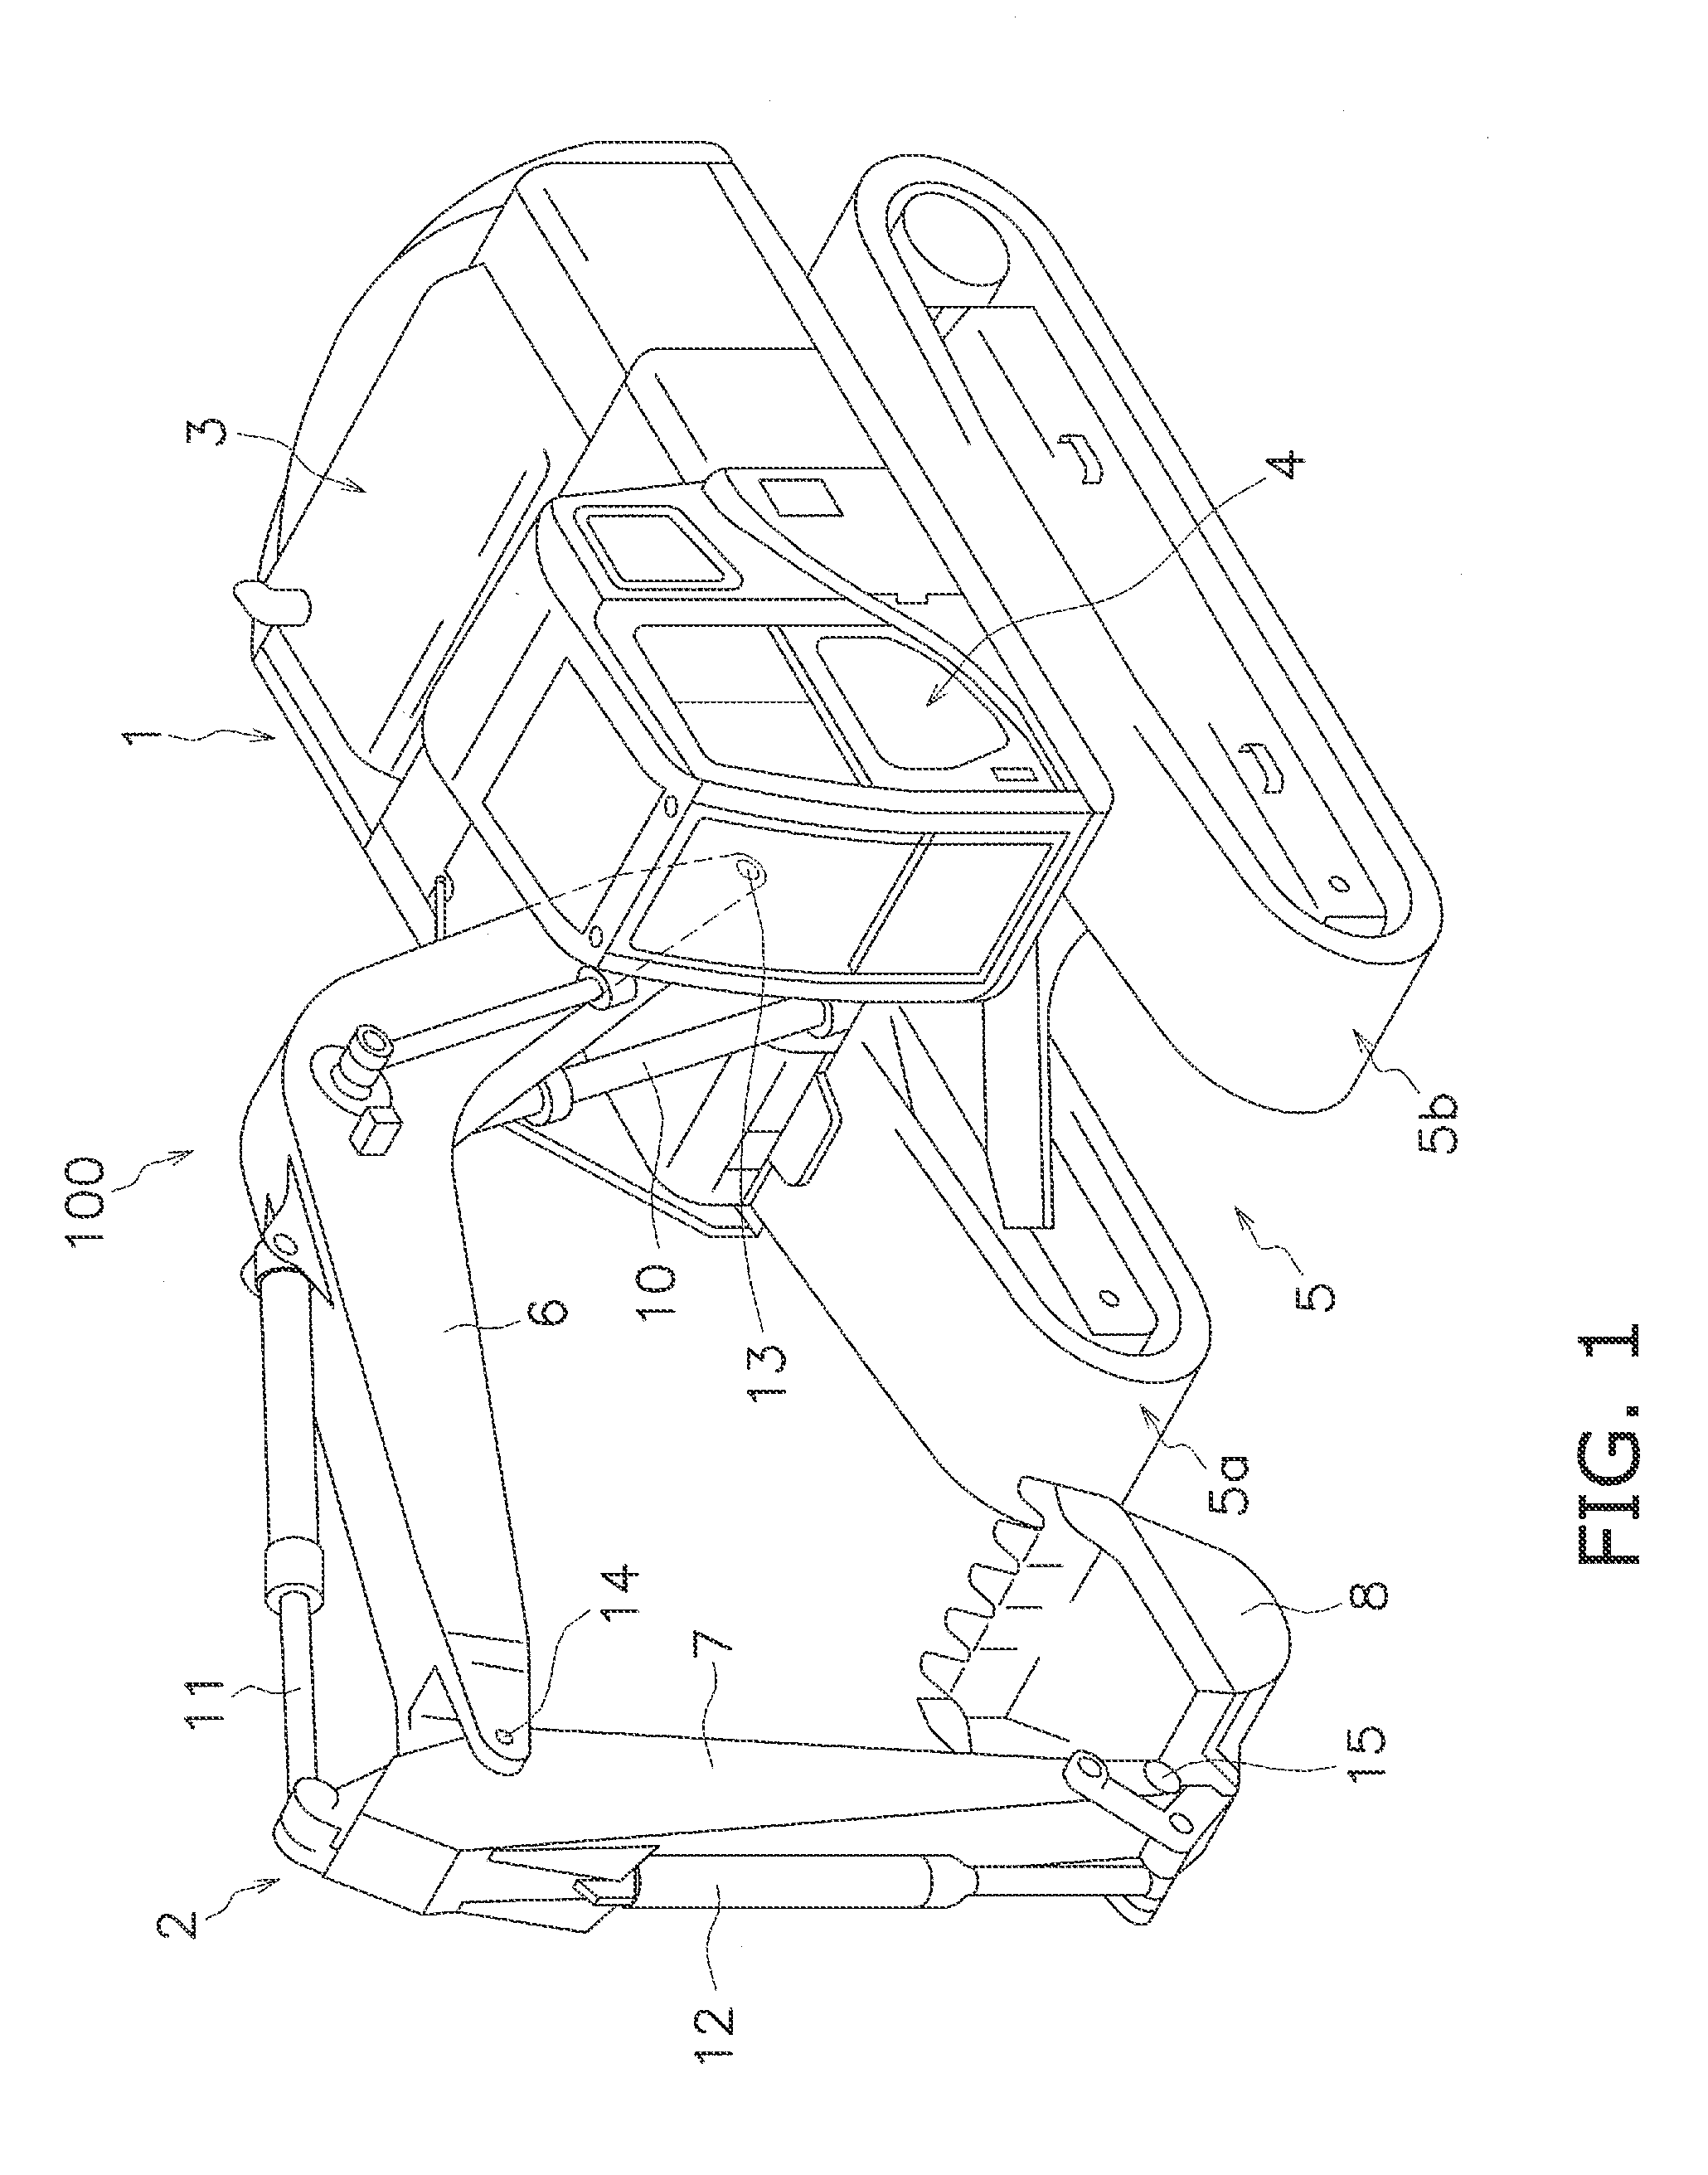 Hydraulic shovel operability range display device and method for controlling same